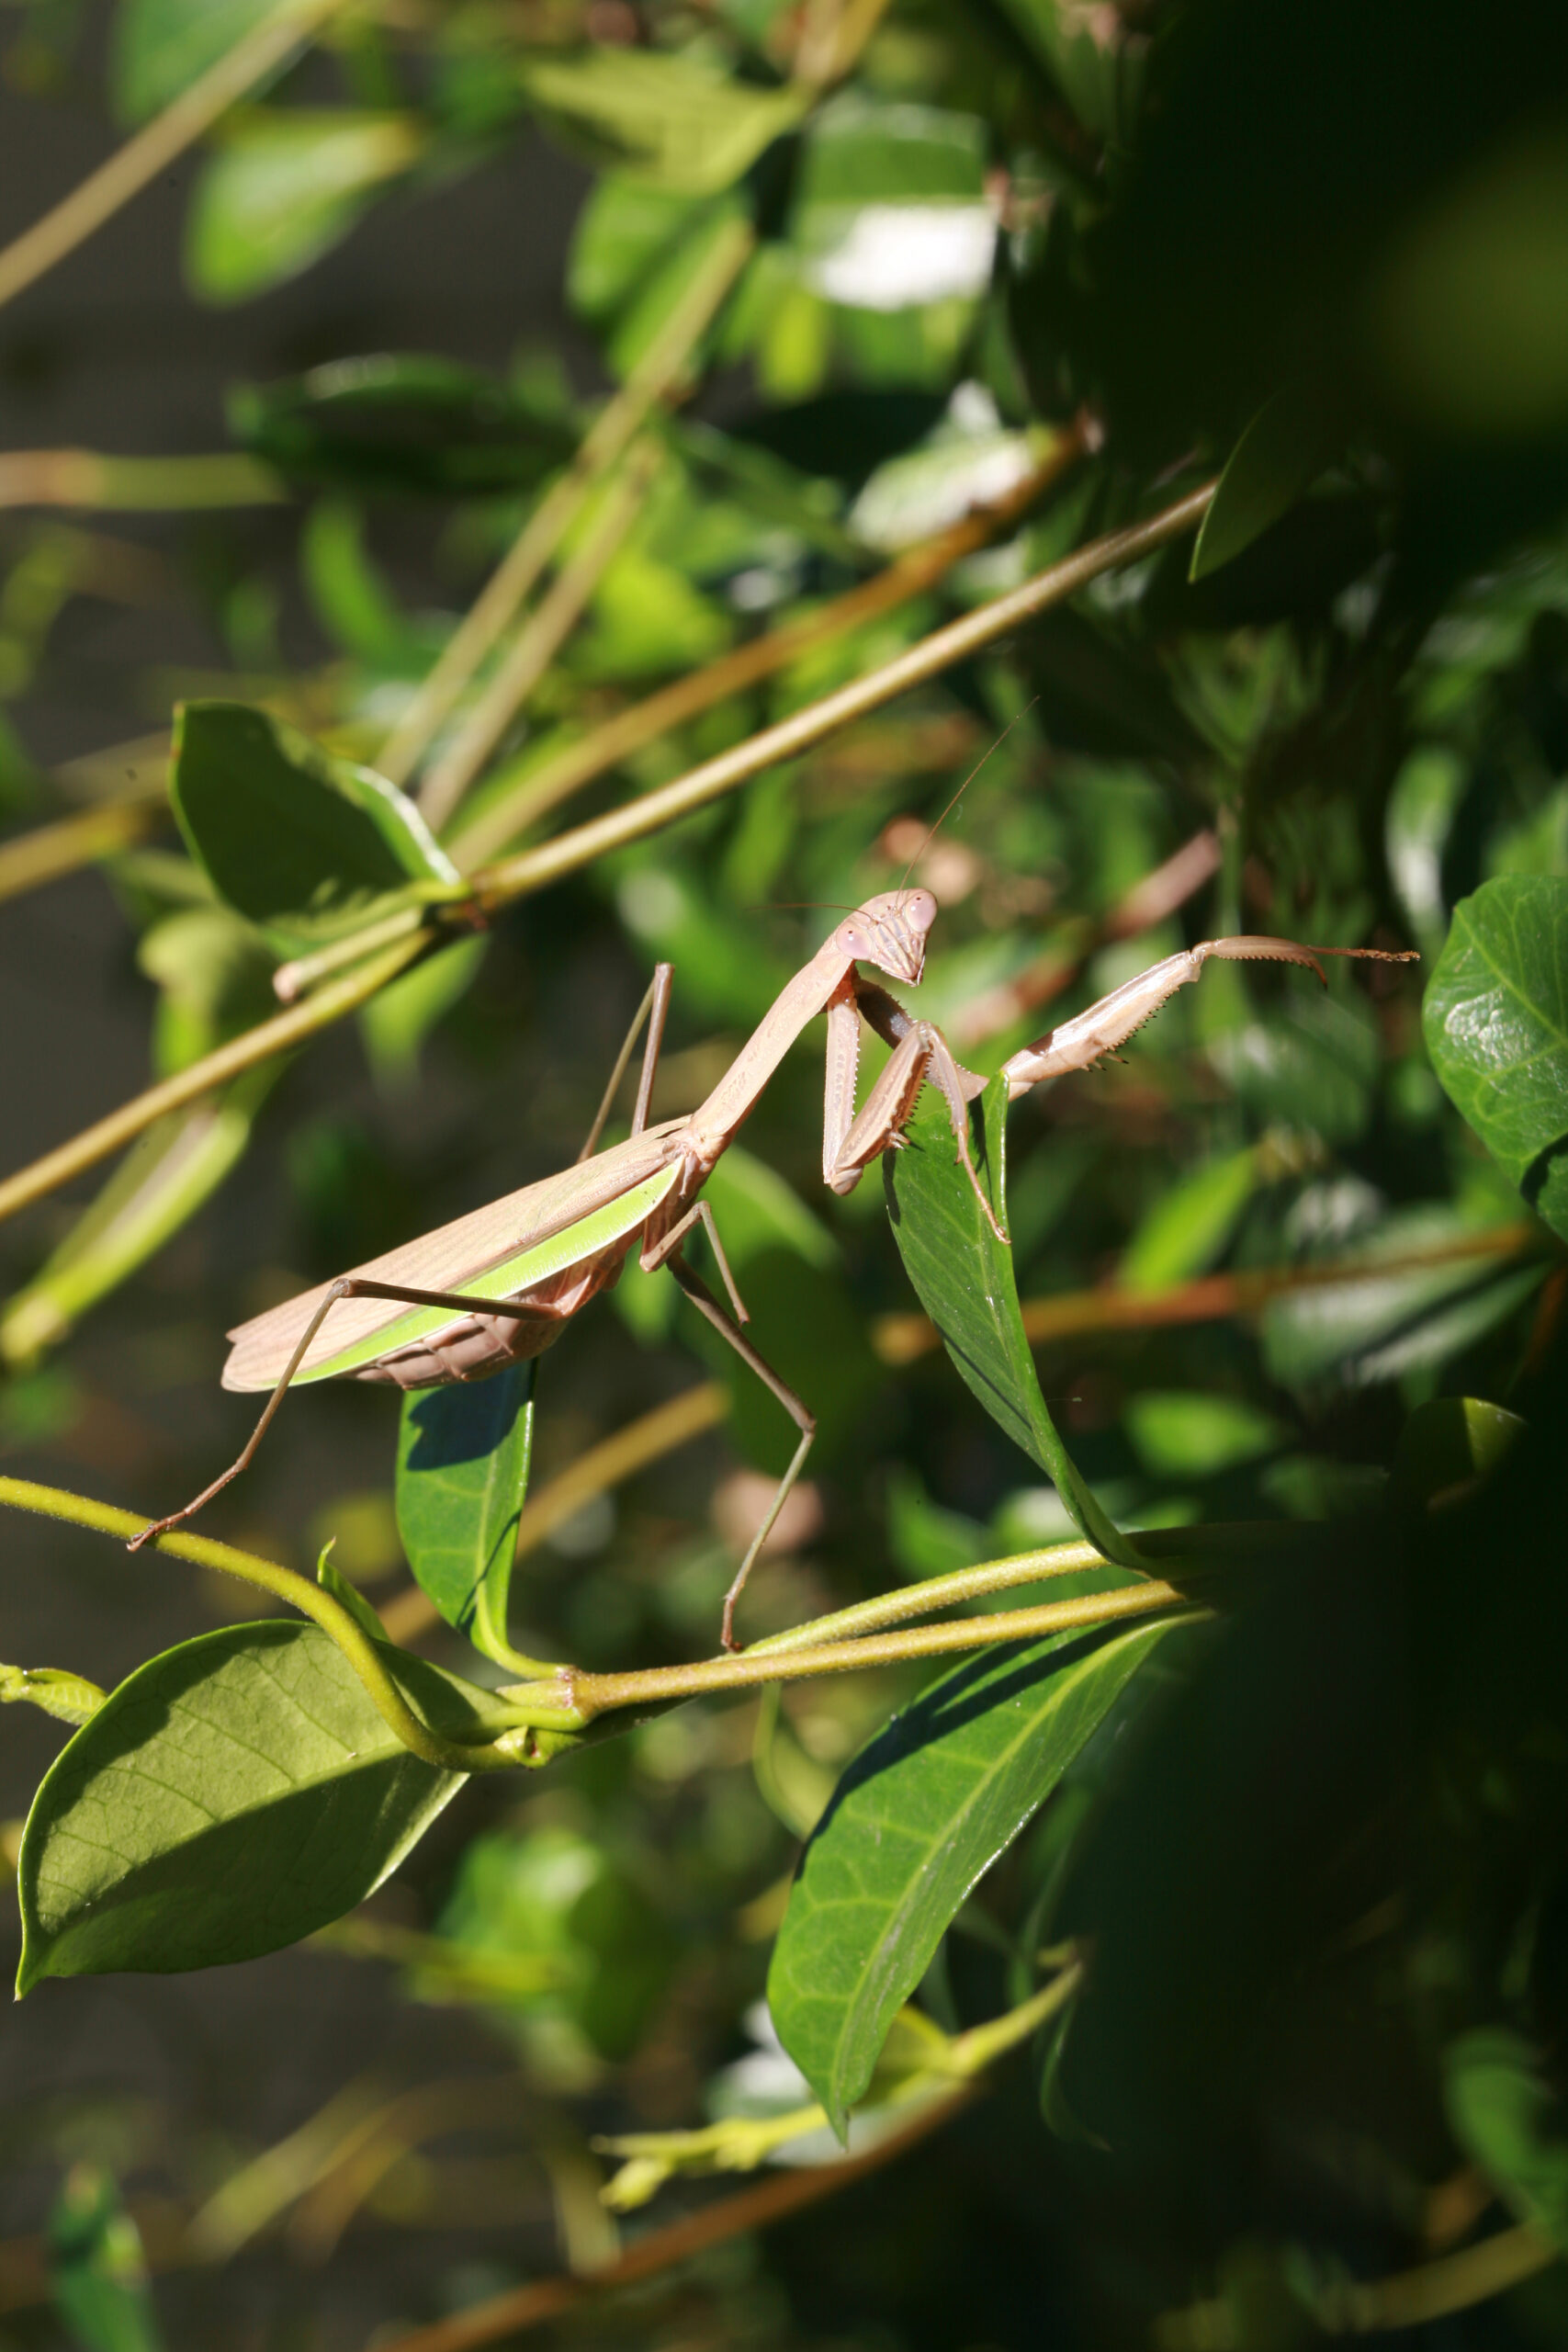 Close-up of a female Chinese Preying Mantis, also known as California Preying Mantis, sitting on a twig with its forelegs folded in front of its body.